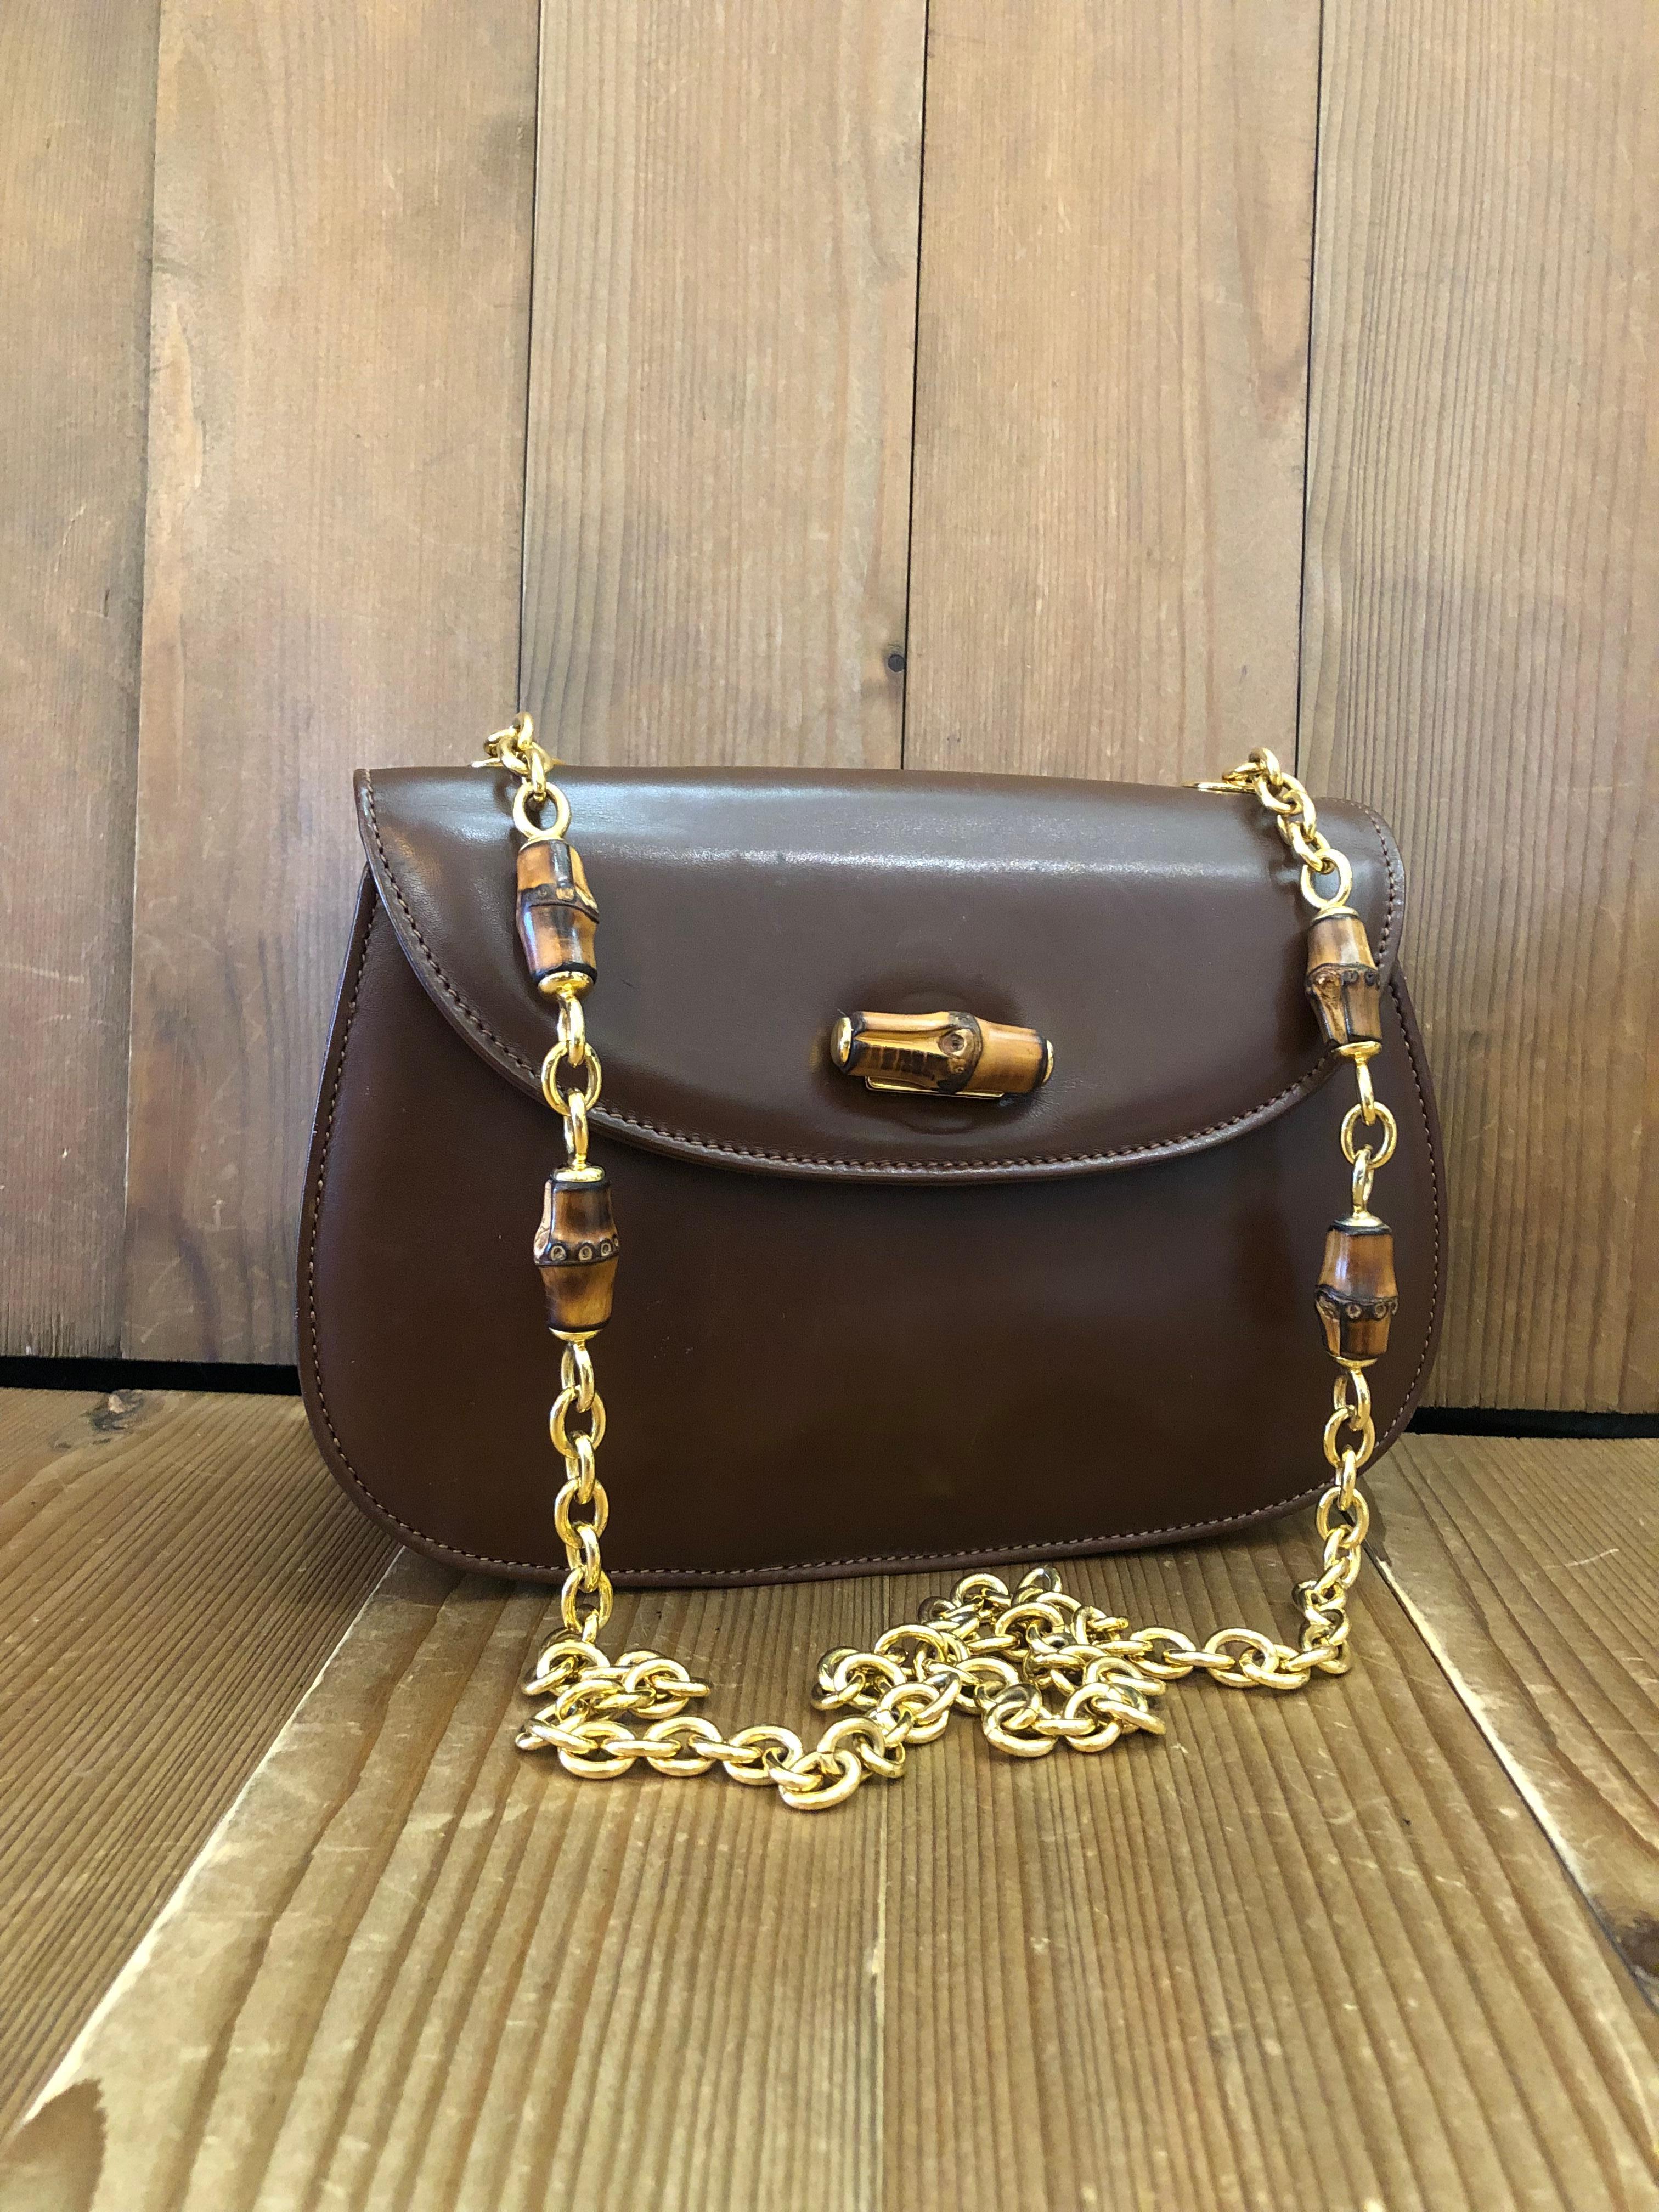 This vintage GUCCI bamboo chain shoulder bag is crafted of smooth calfskin leather in brown featuring a sturdy gold toned chain with bamboo internodes. Front flap bamboo turnlock closure opens to a new beige interior featuring a zippered pocket.